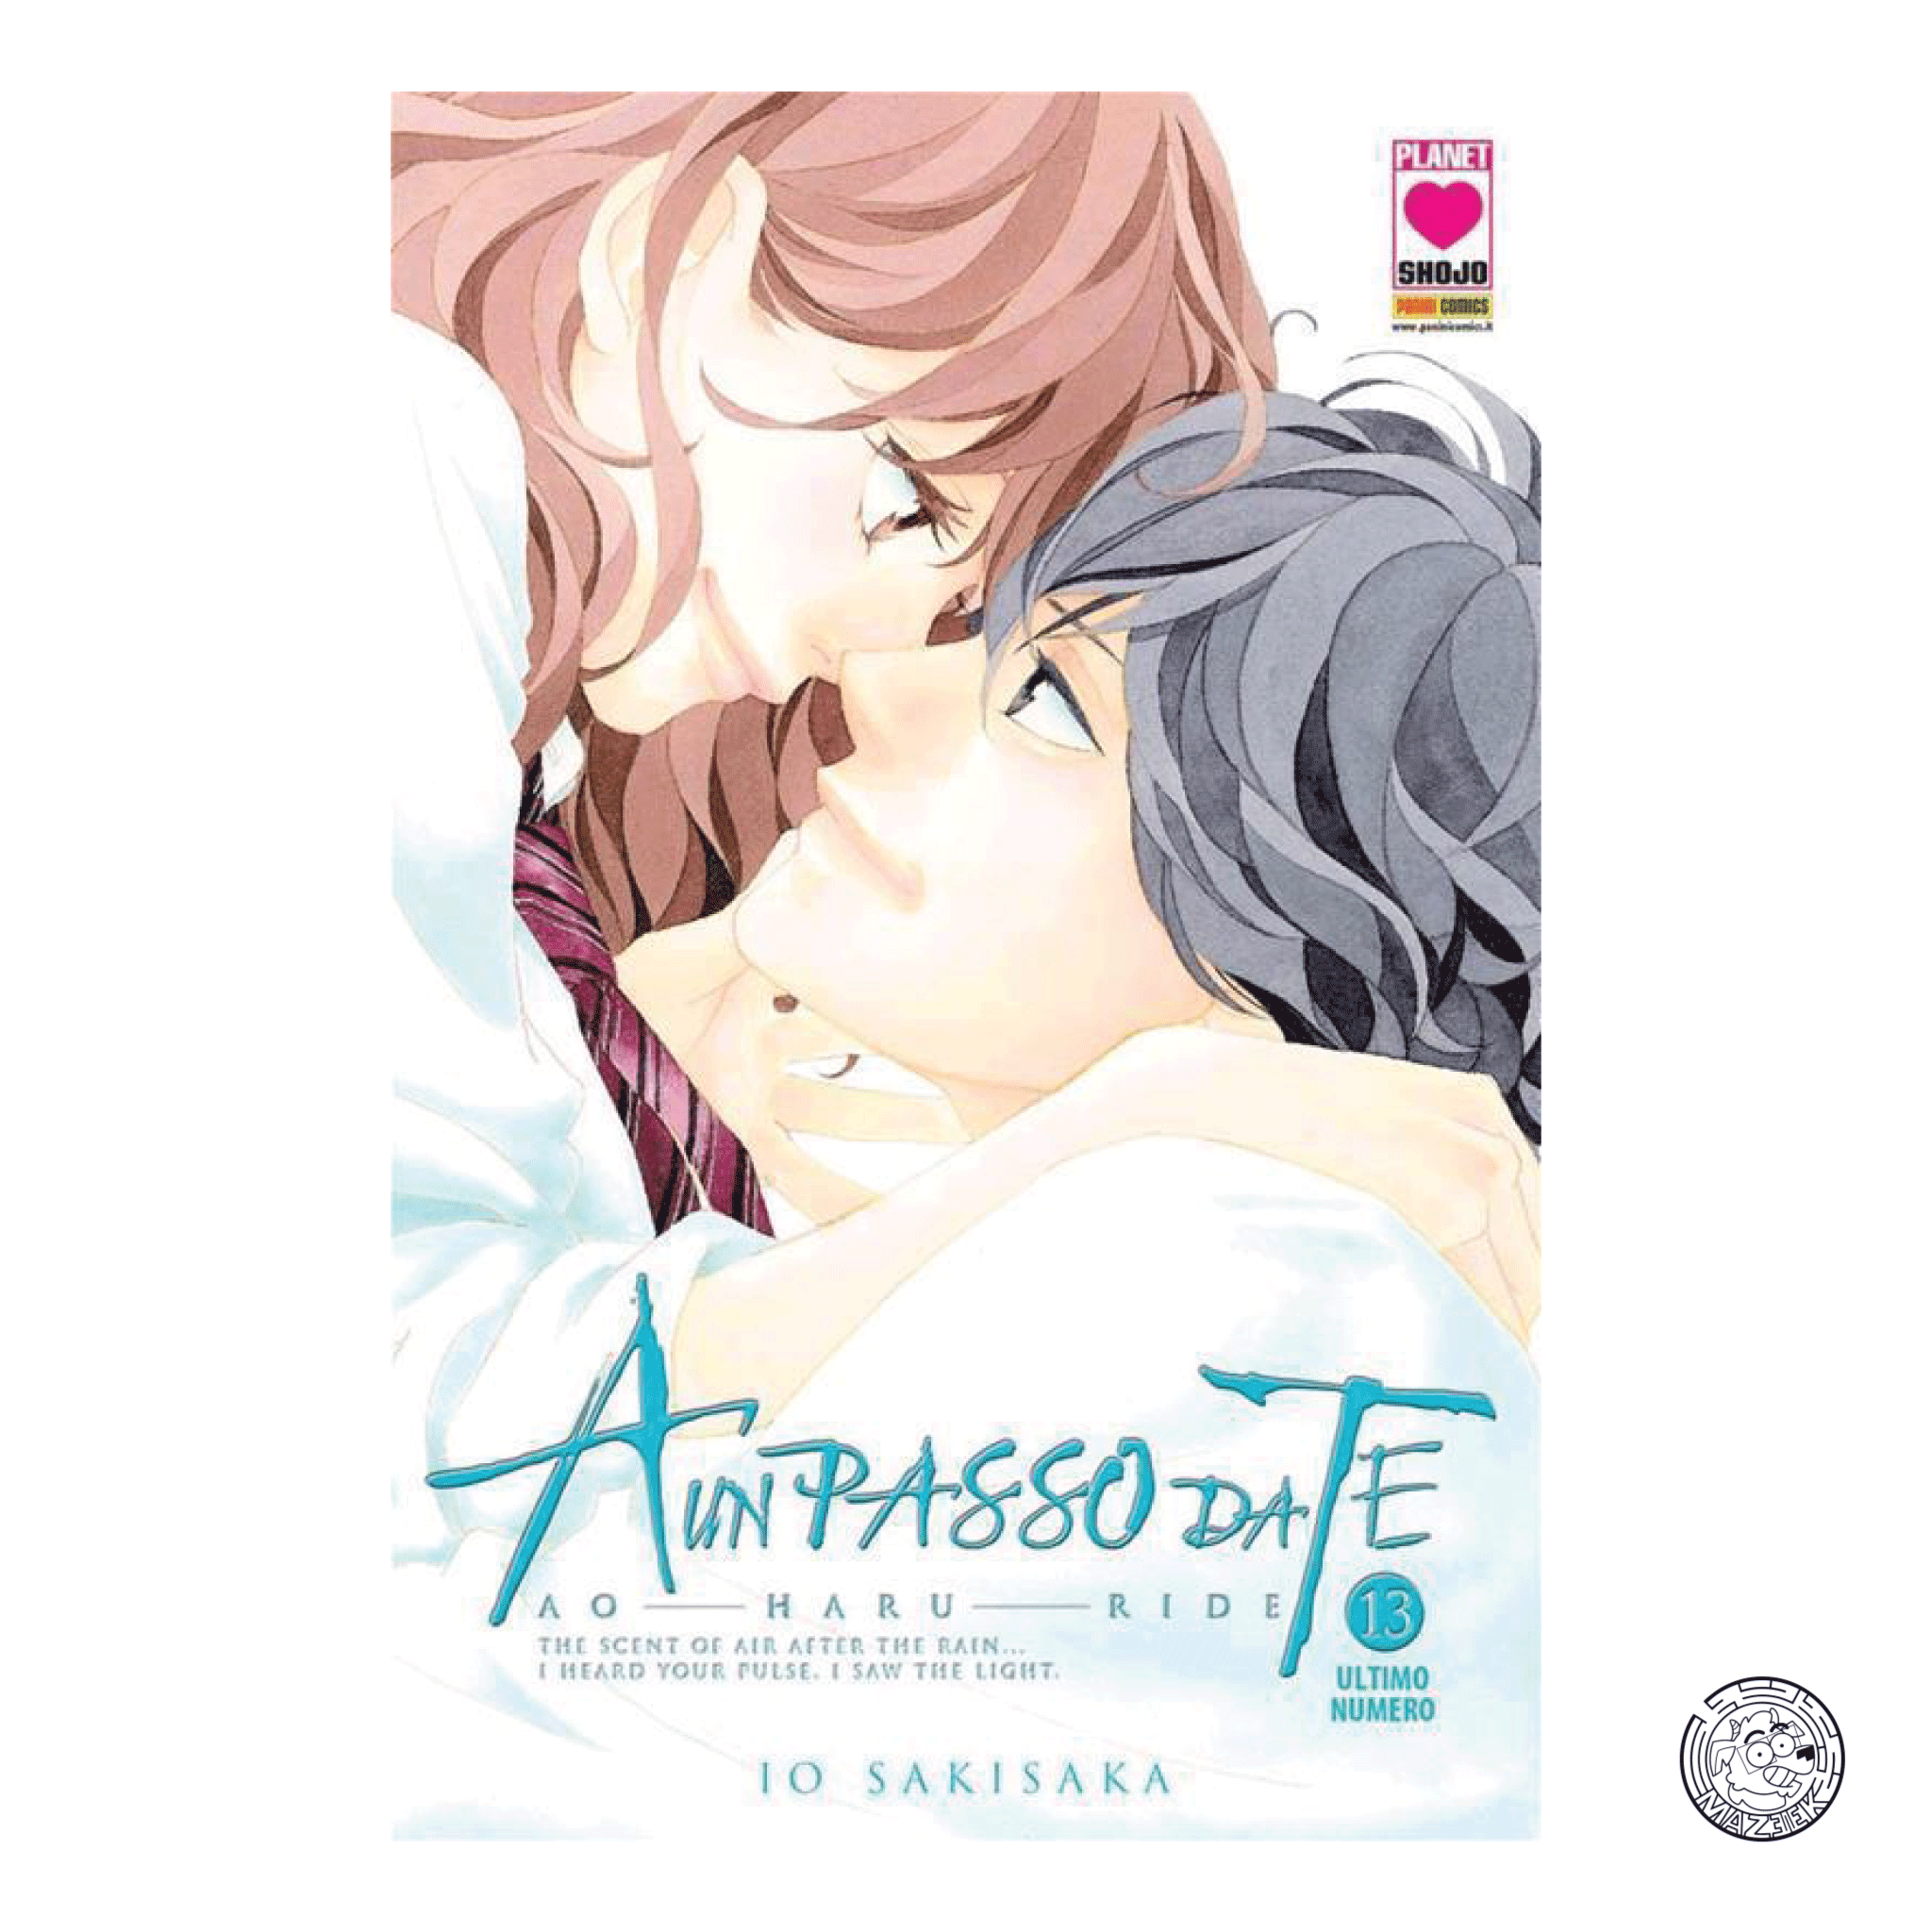 One step away from you: AO HARU RIDE 13 - Third Printing